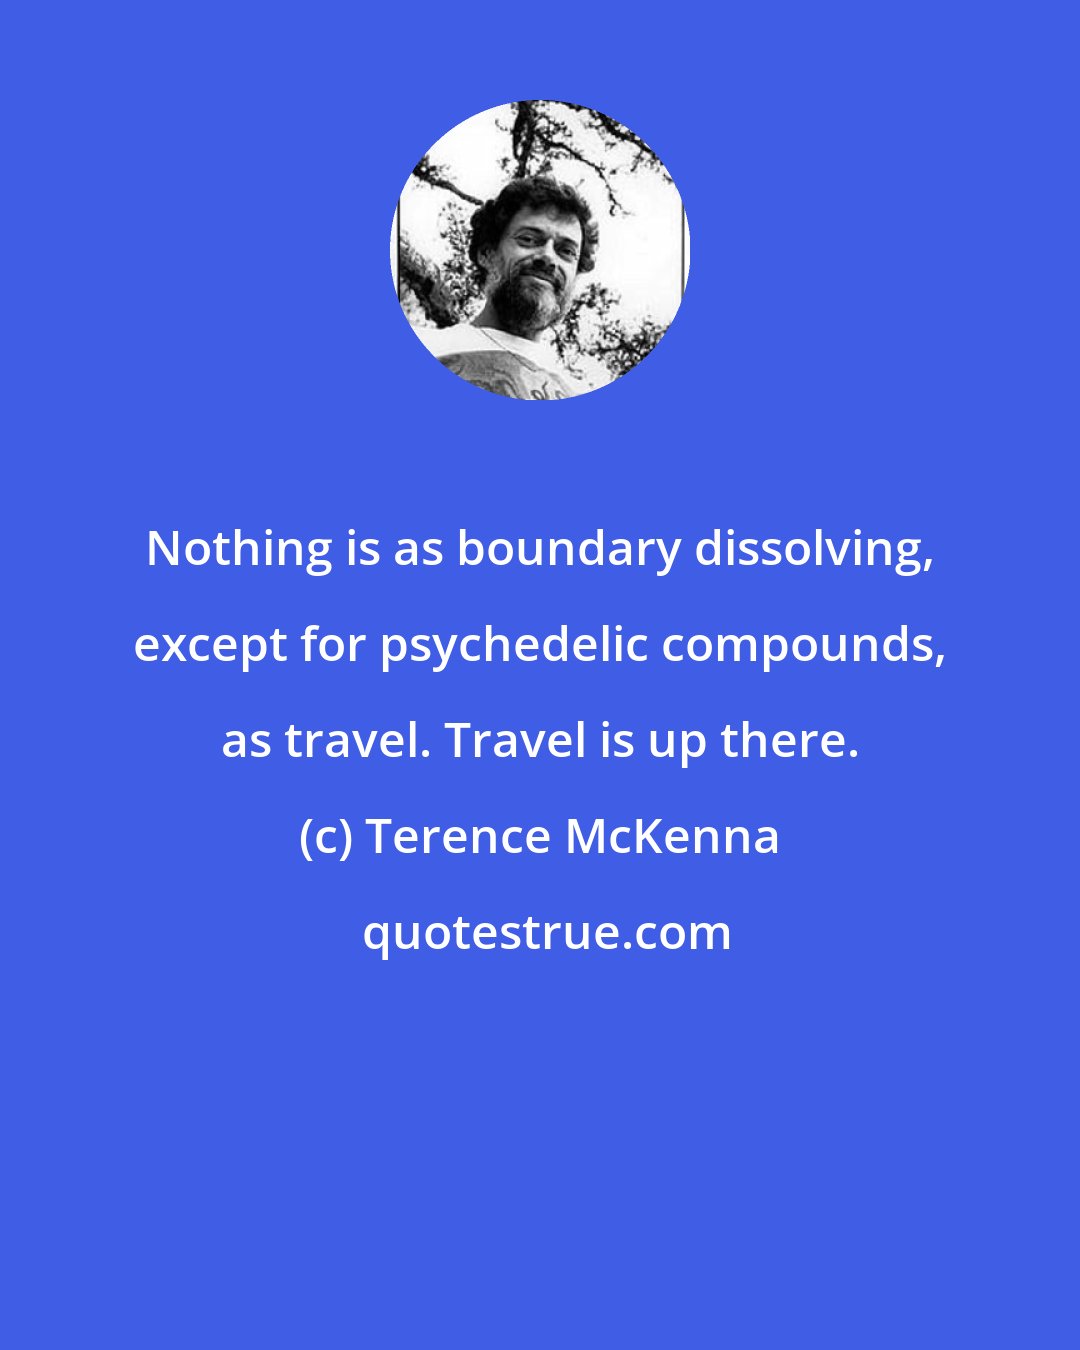 Terence McKenna: Nothing is as boundary dissolving, except for psychedelic compounds, as travel. Travel is up there.